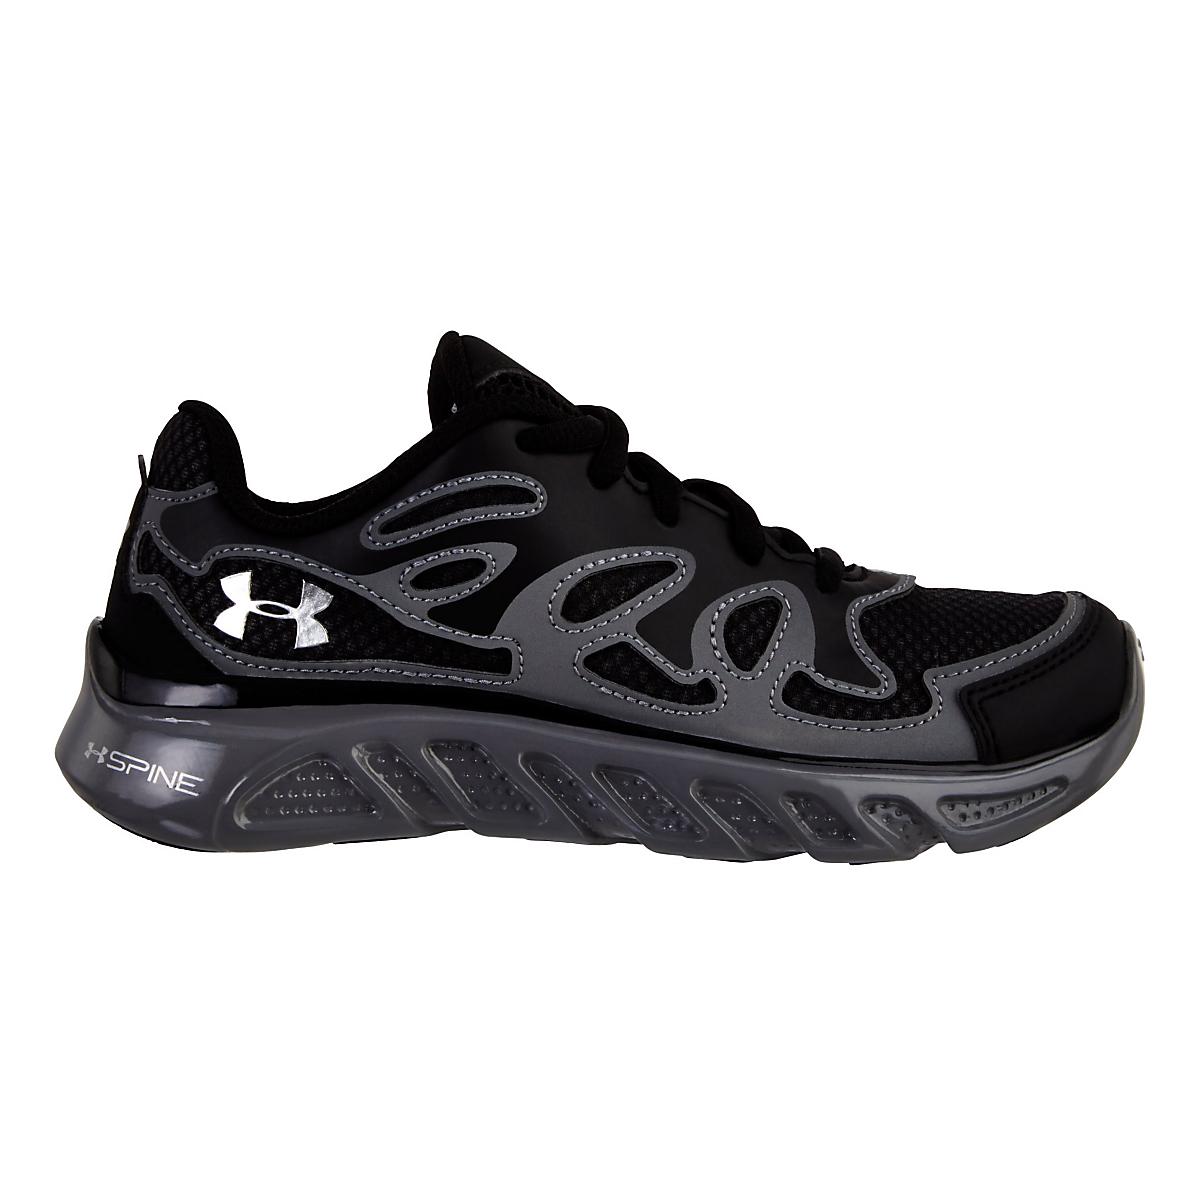 Kids Under Armour Boys Spine II SL Sandals Shoe at Road Runner Sports